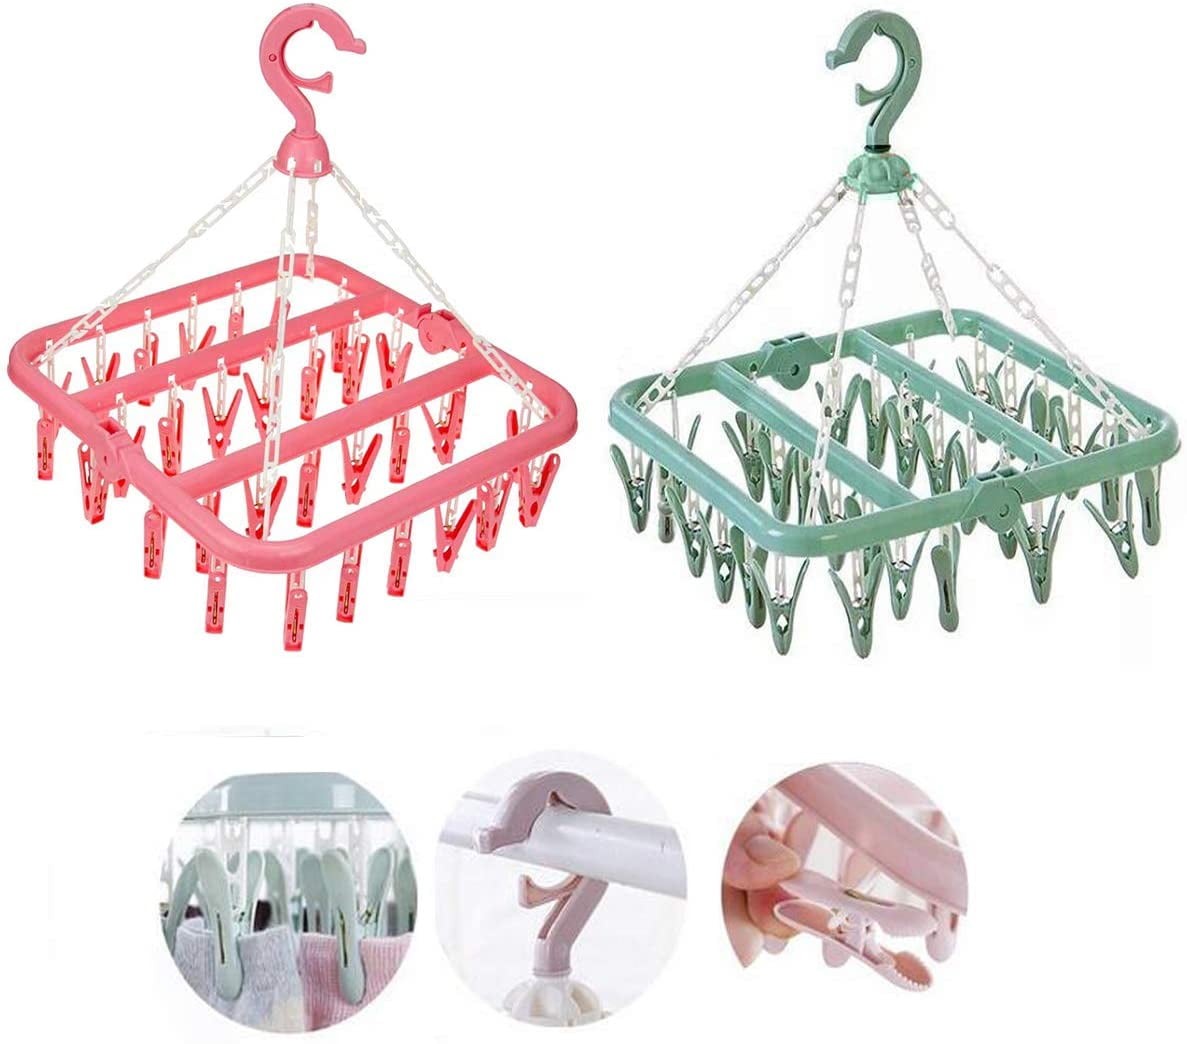 Details about  / 24PCS Plastic Clothes Clips Drying Socks Towel Rack Clamps Holder